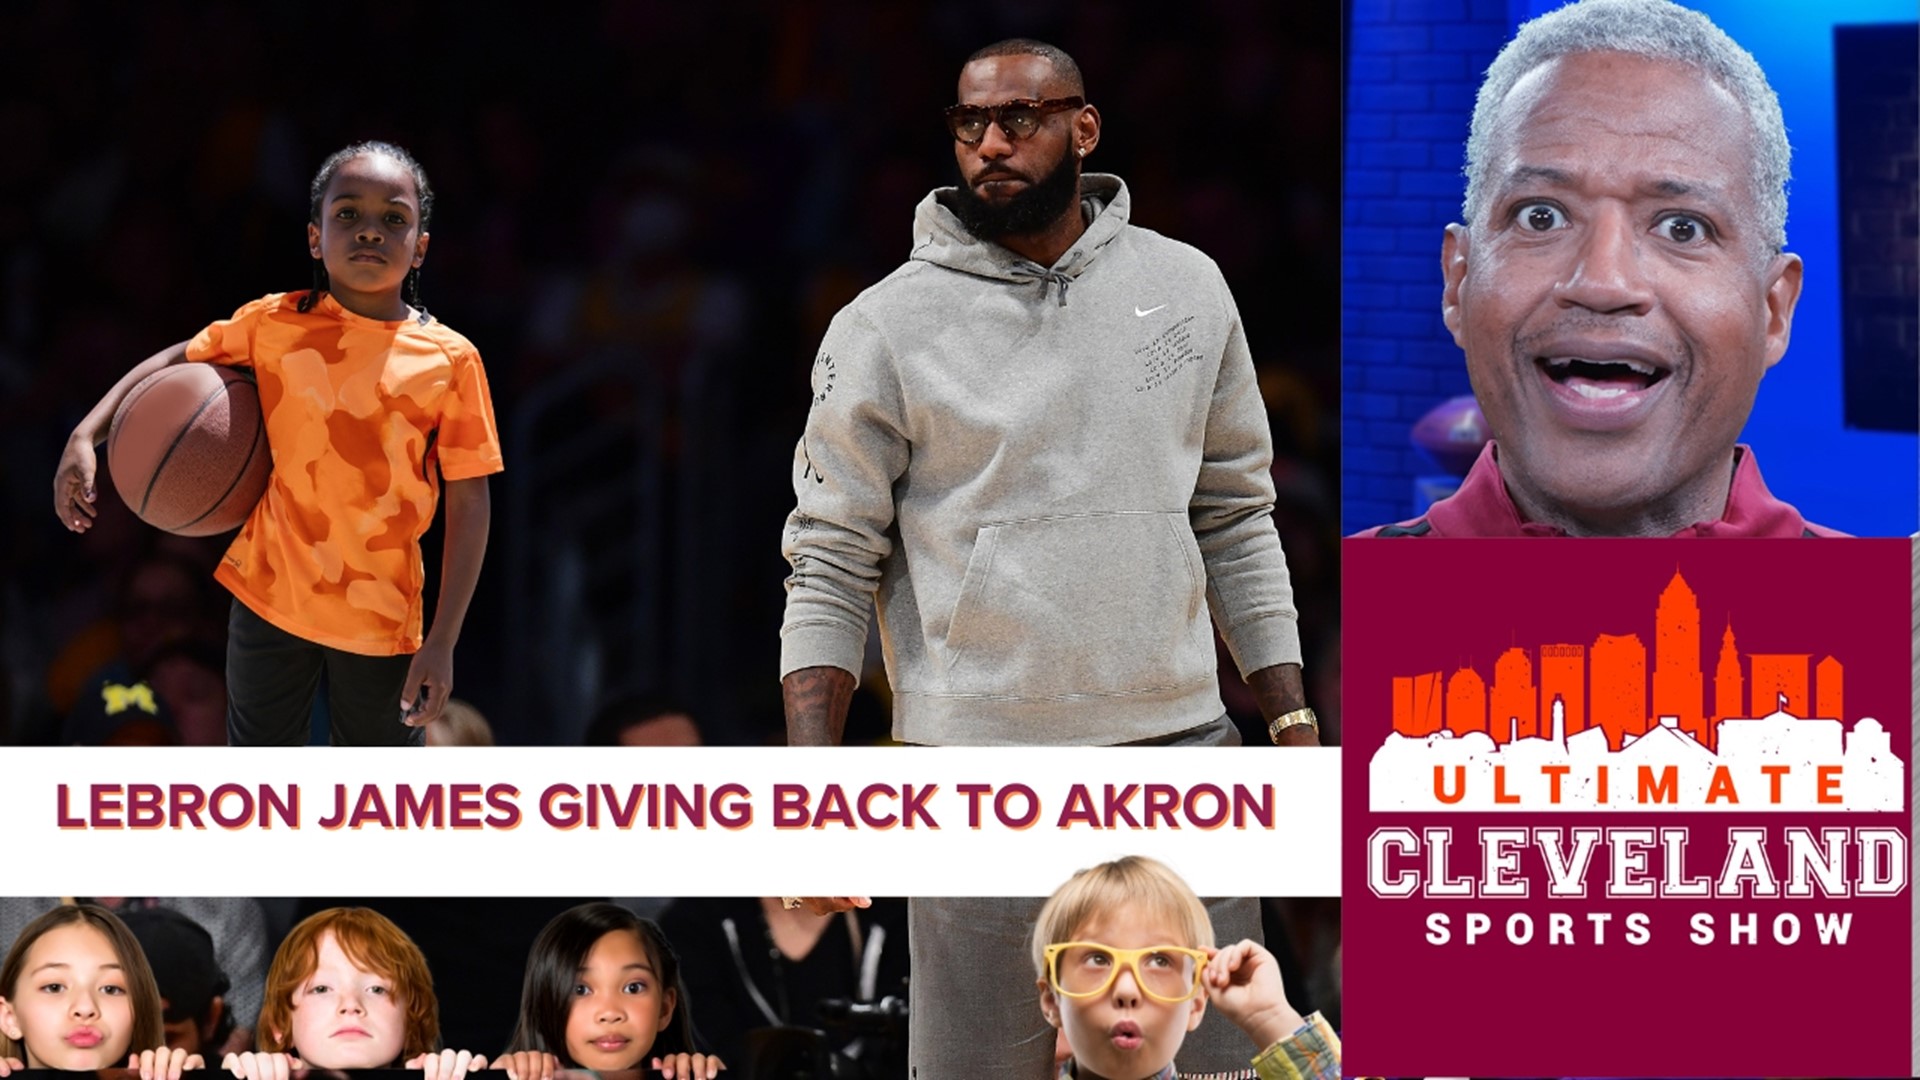 Brad Sellers gives LeBron James kudos for him putting his money where his mouth is. He's really making the community better on and off the court.